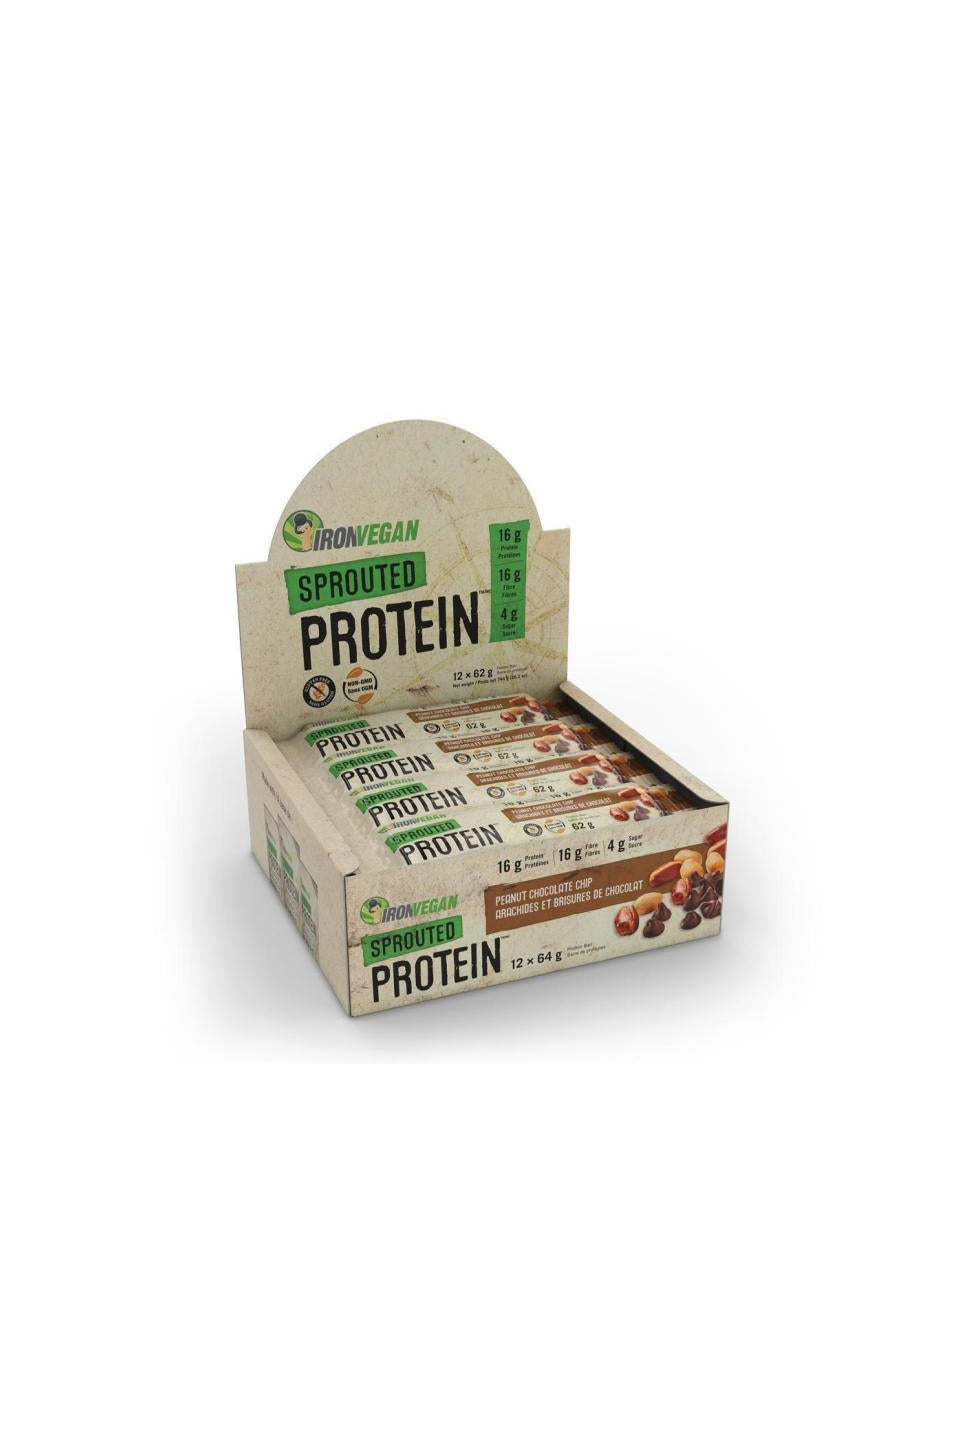 Iron Vegan Peanut Chocolate Chip Sprouted Protein 64g Case 12